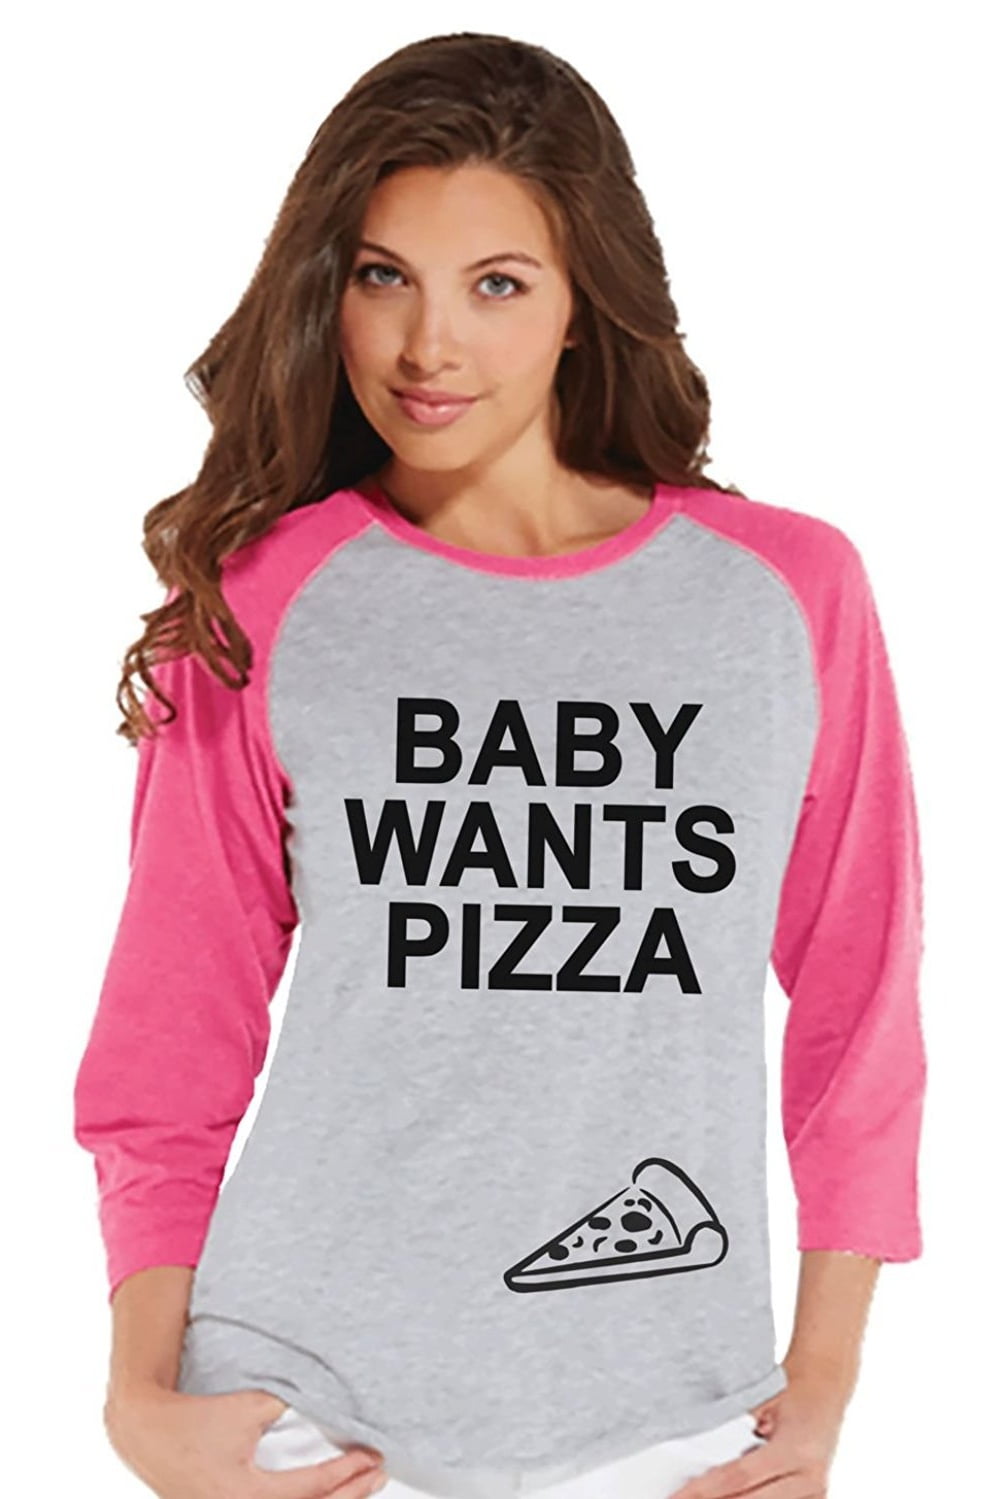 Ladies Cool Pizza Funny T-Shirt Girls Novelty Food Snack Top 